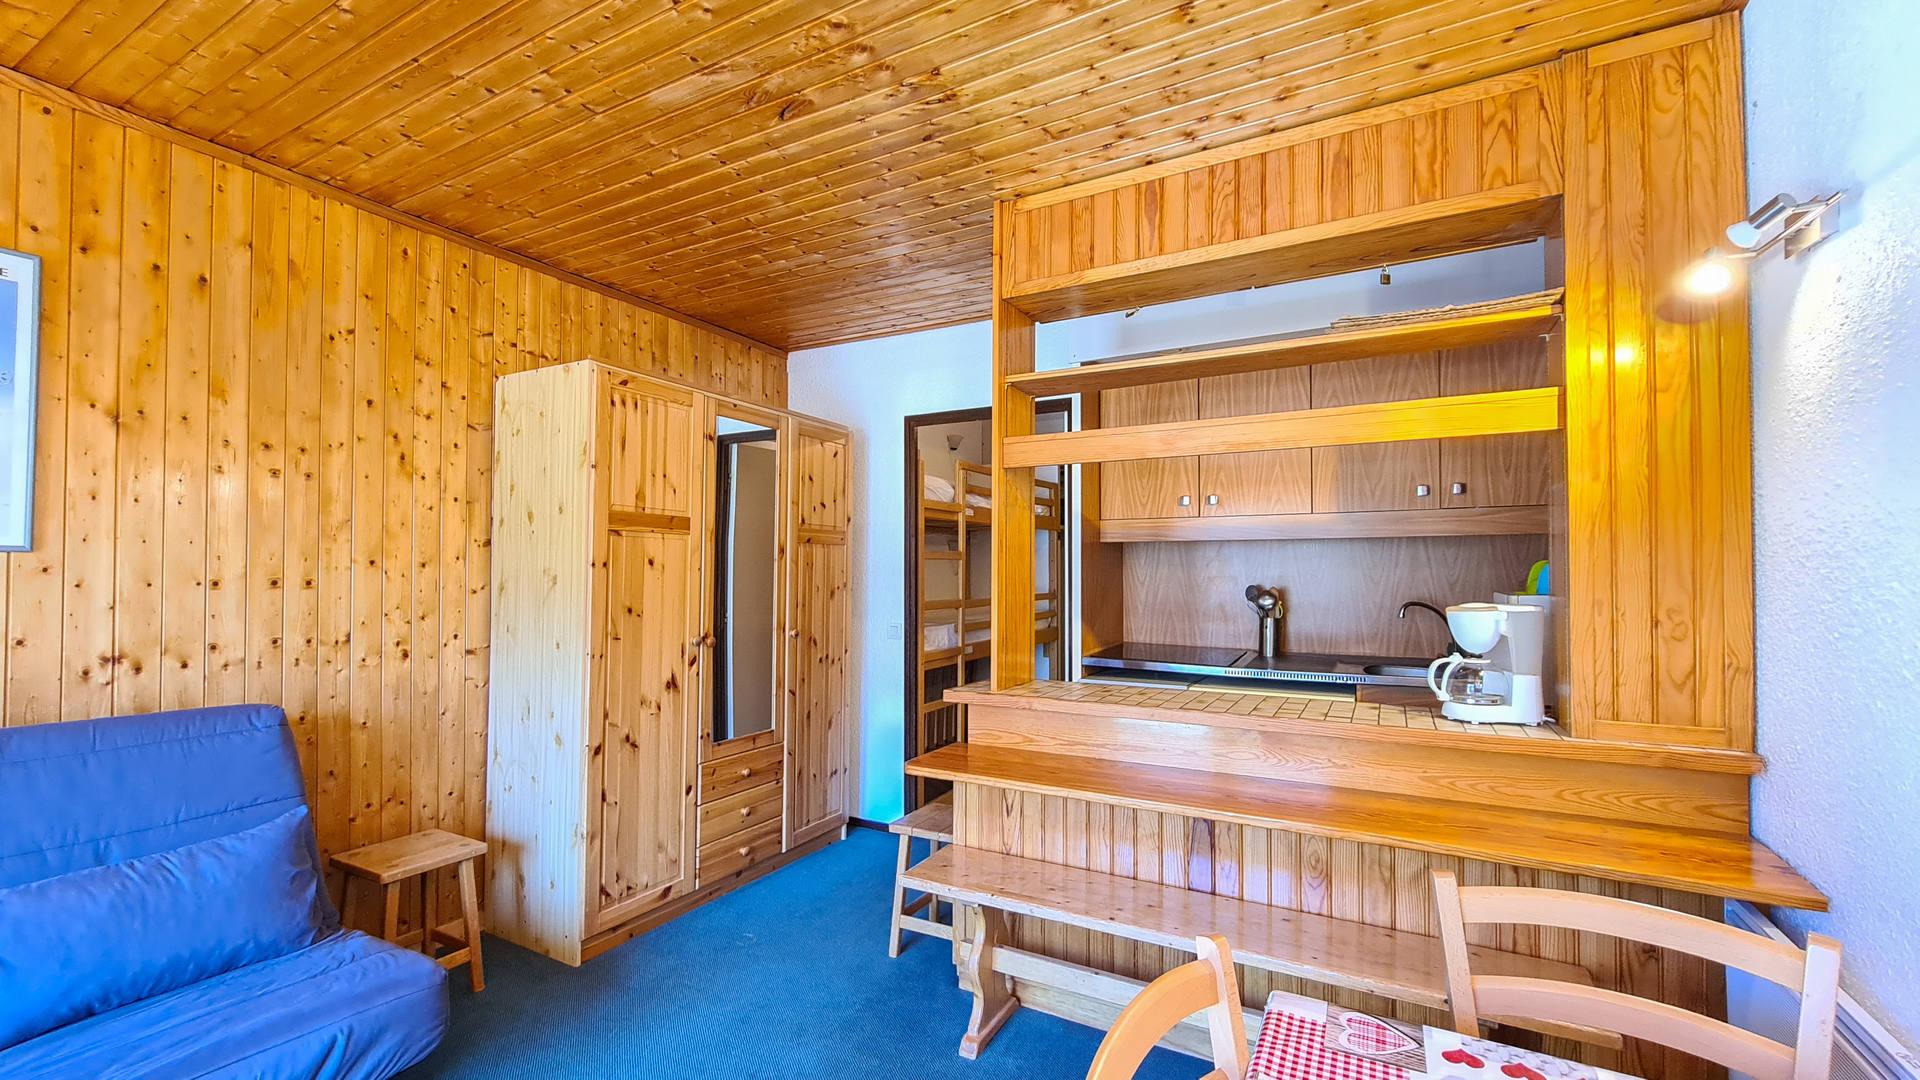 Studio 4 people - Apartements ANDROMEDE - Flaine Forêt 1700